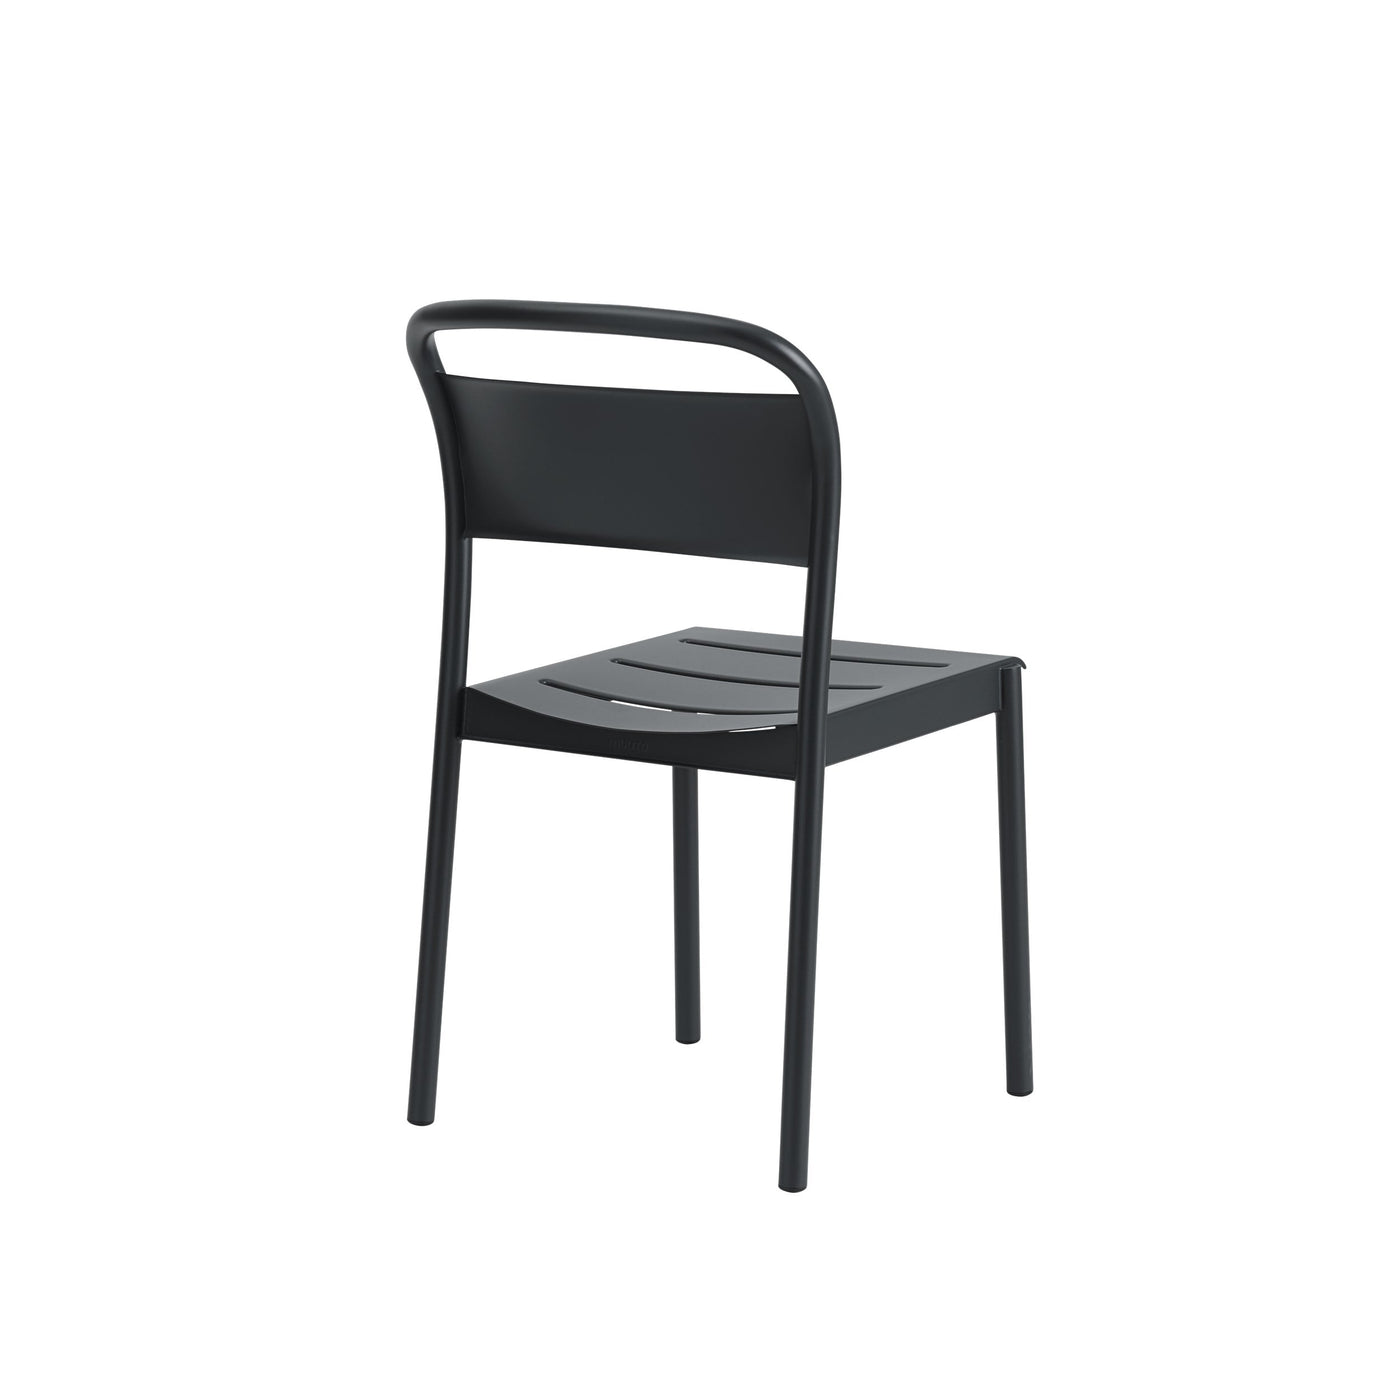 Muuto Linear Steel Side Chair. Shop online at someday designs. #colour_black